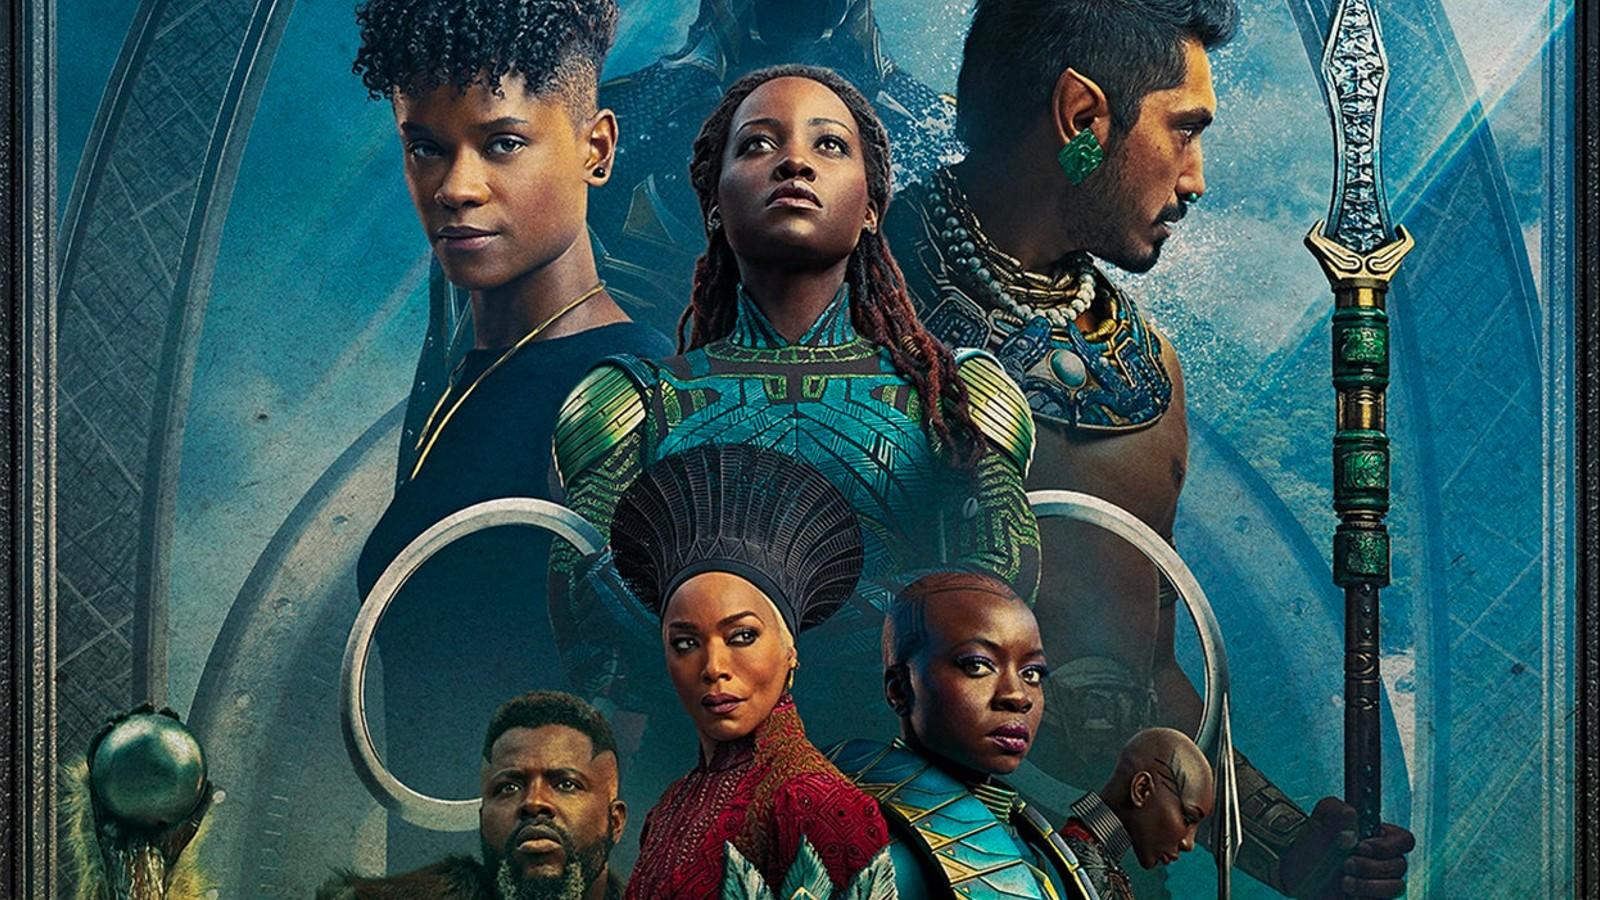 The poster of the cast in Black Panther 2, Wakanda Forever